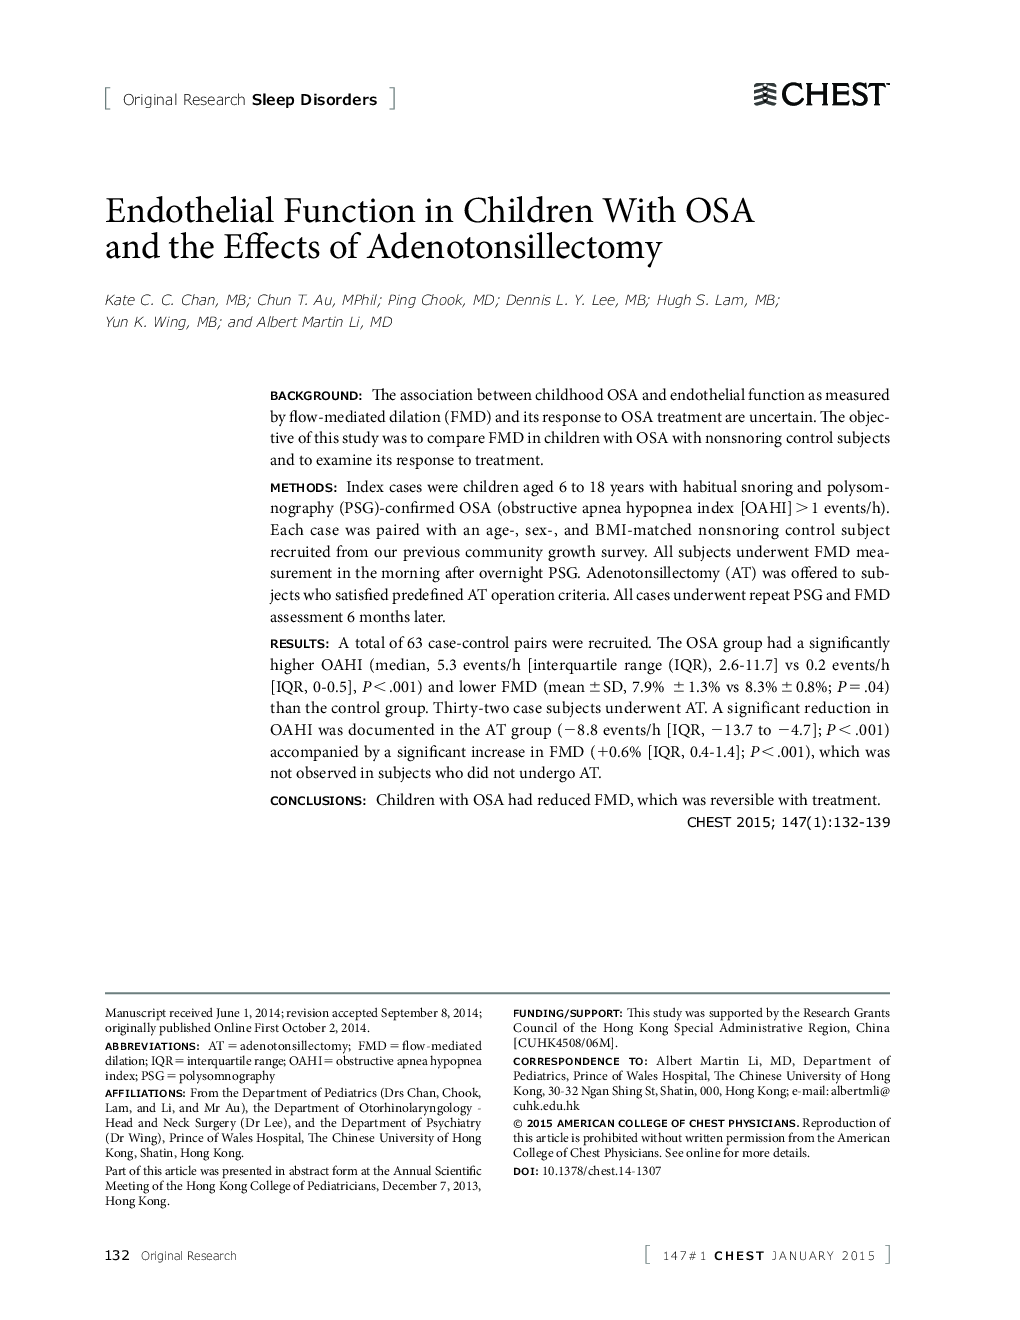 Endothelial Function in Children With OSA and the Effects of Adenotonsillectomy